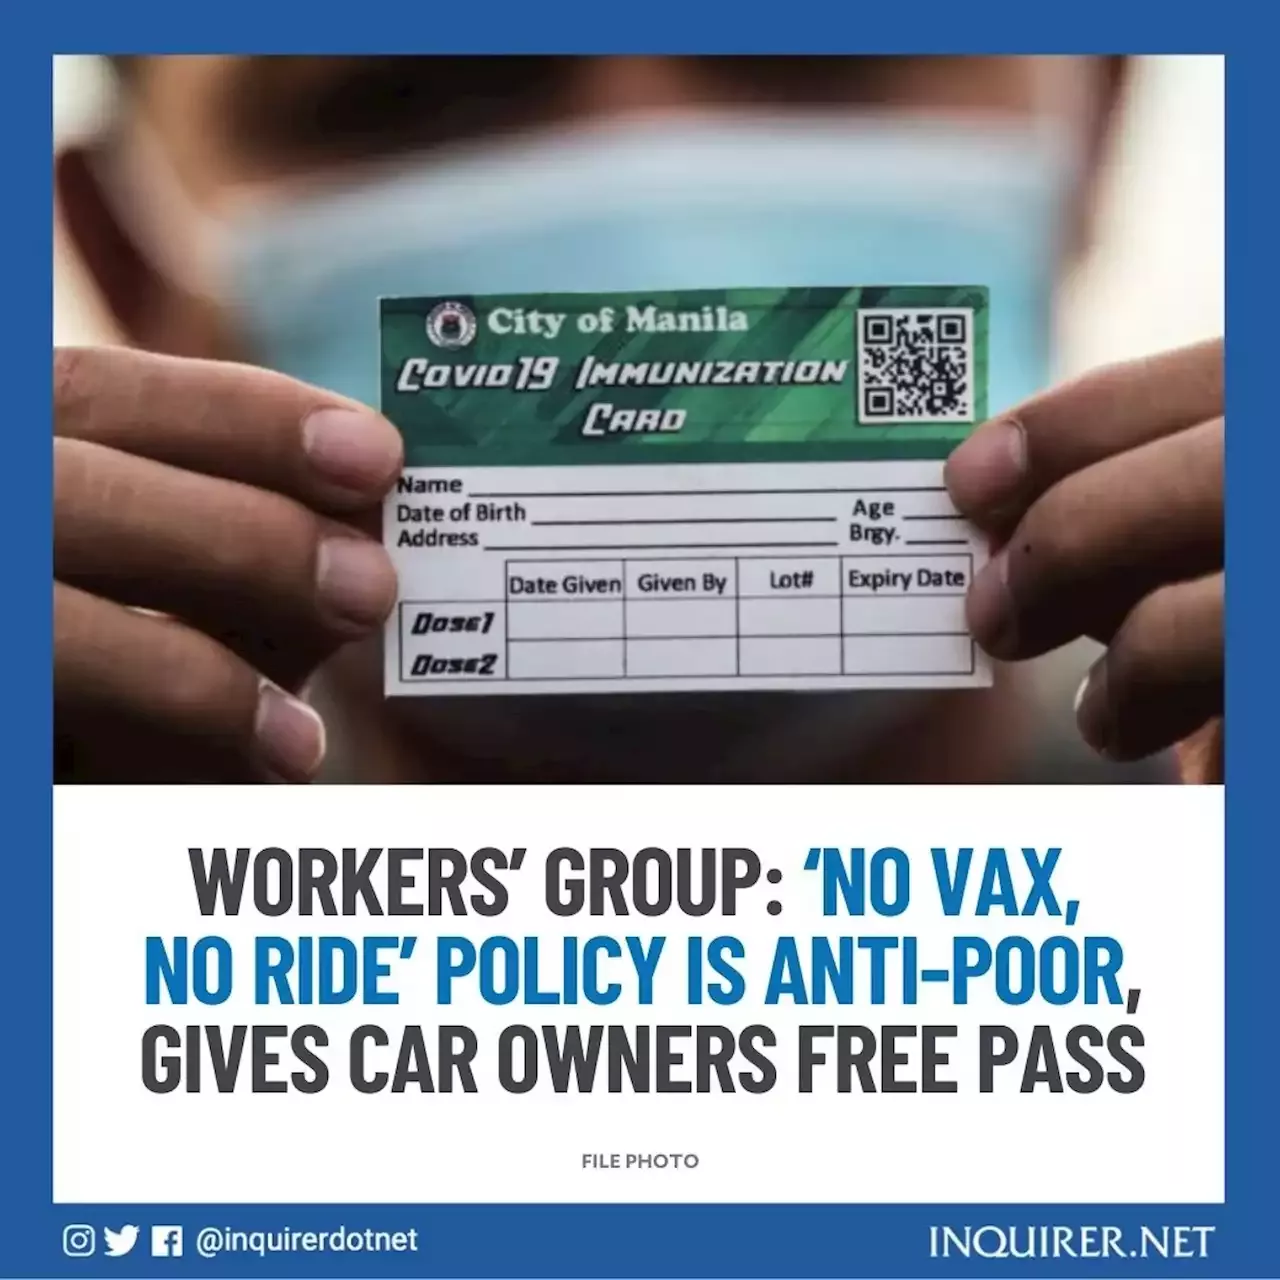 Workers’ group: ‘No vax, no ride’ policy is anti-poor, gives car owners free pass